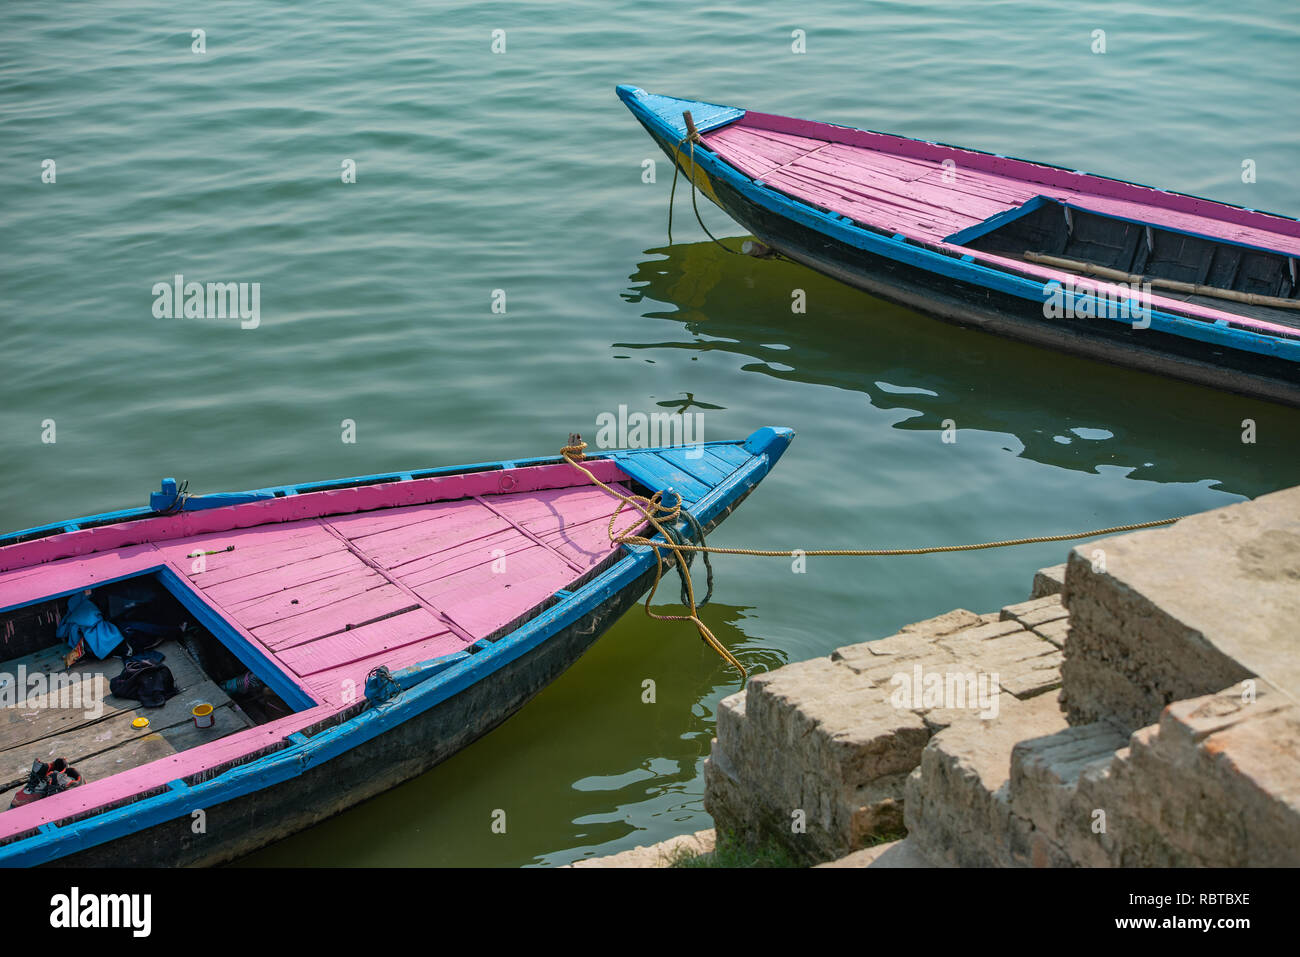 Composition with pink and blue boats docked on the Ghat in Varanasi in India: The river's water provides a green backdrop for the two colourful boats. Stock Photo